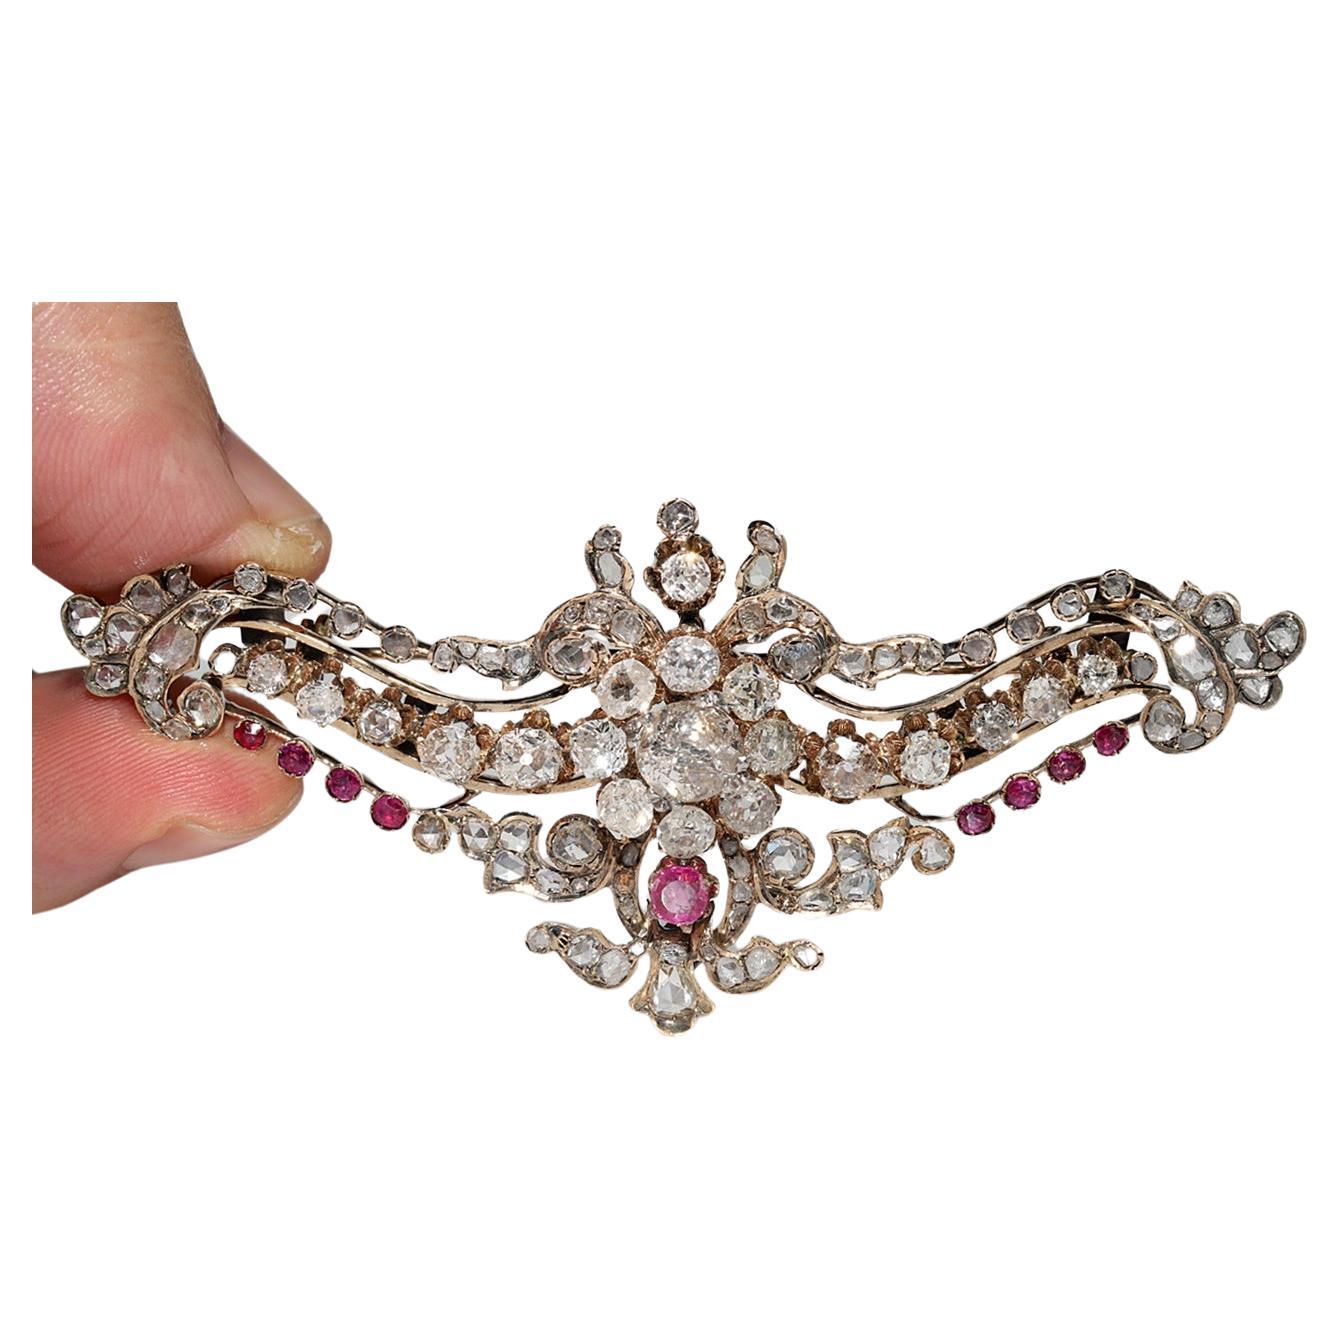 Antique Circa 1900s 14k Gold Natural Old Cut Diamond And Ruby Brooch